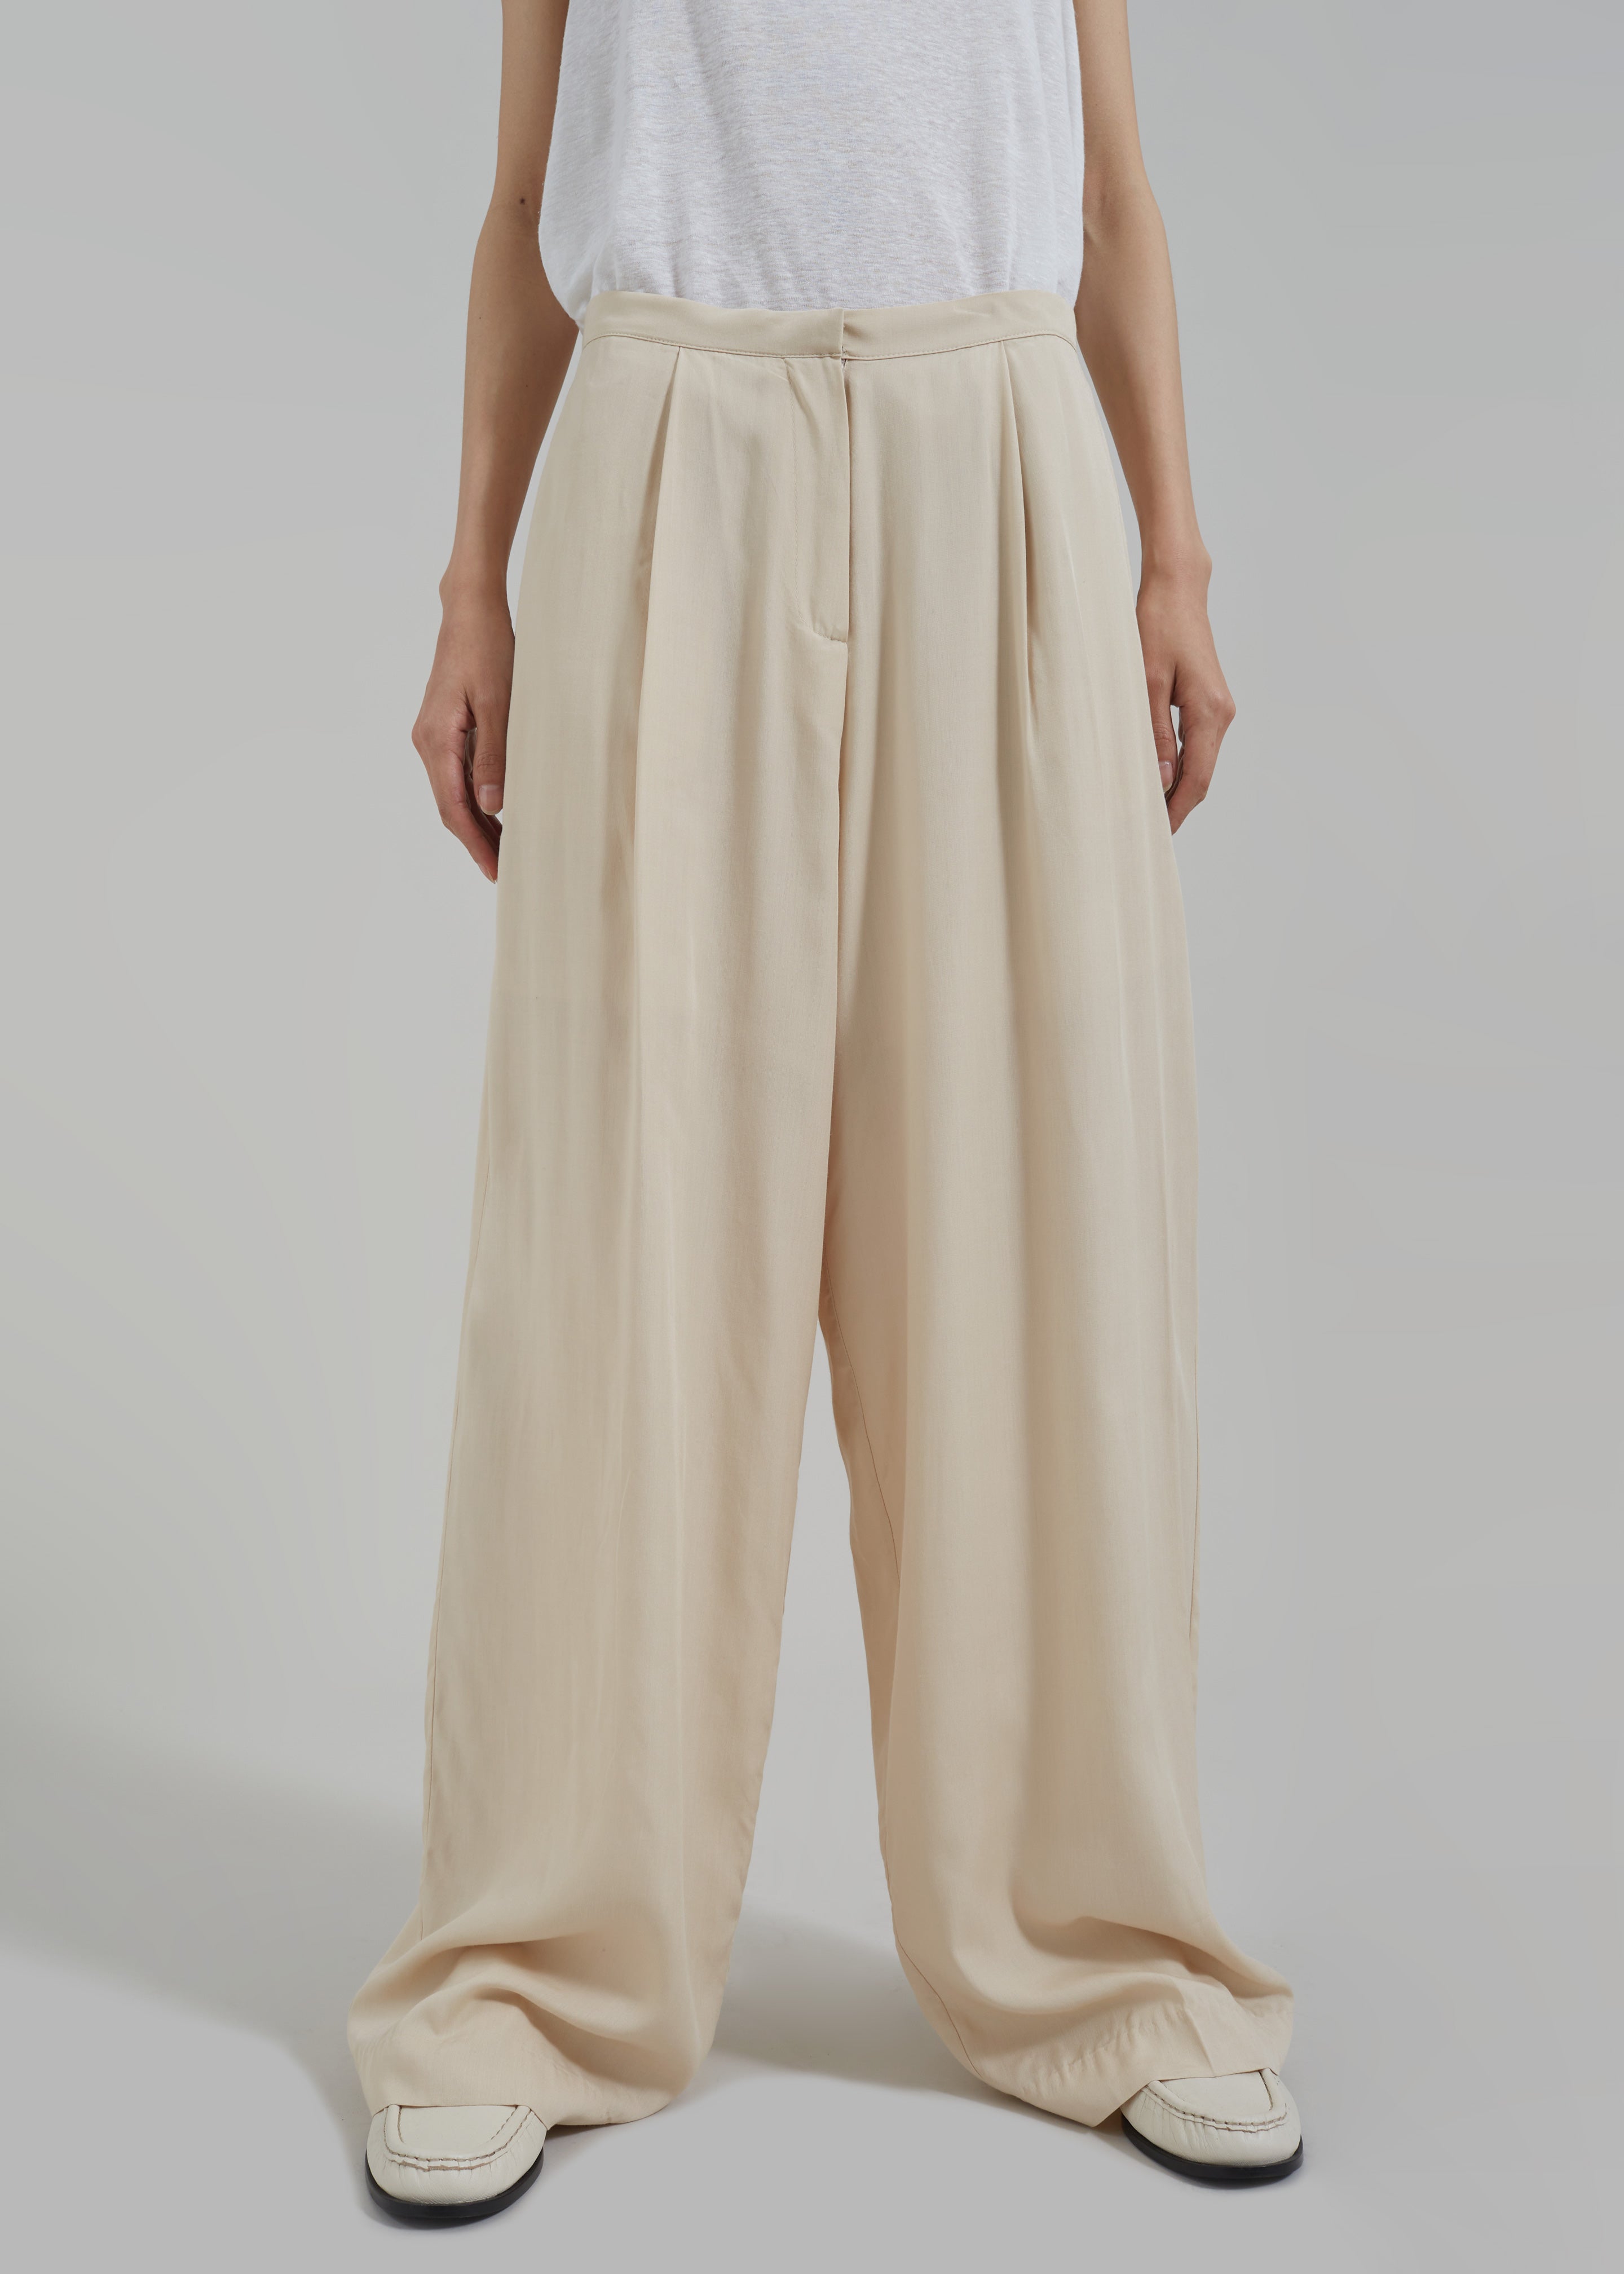 Colyn Trousers - Beige - 2